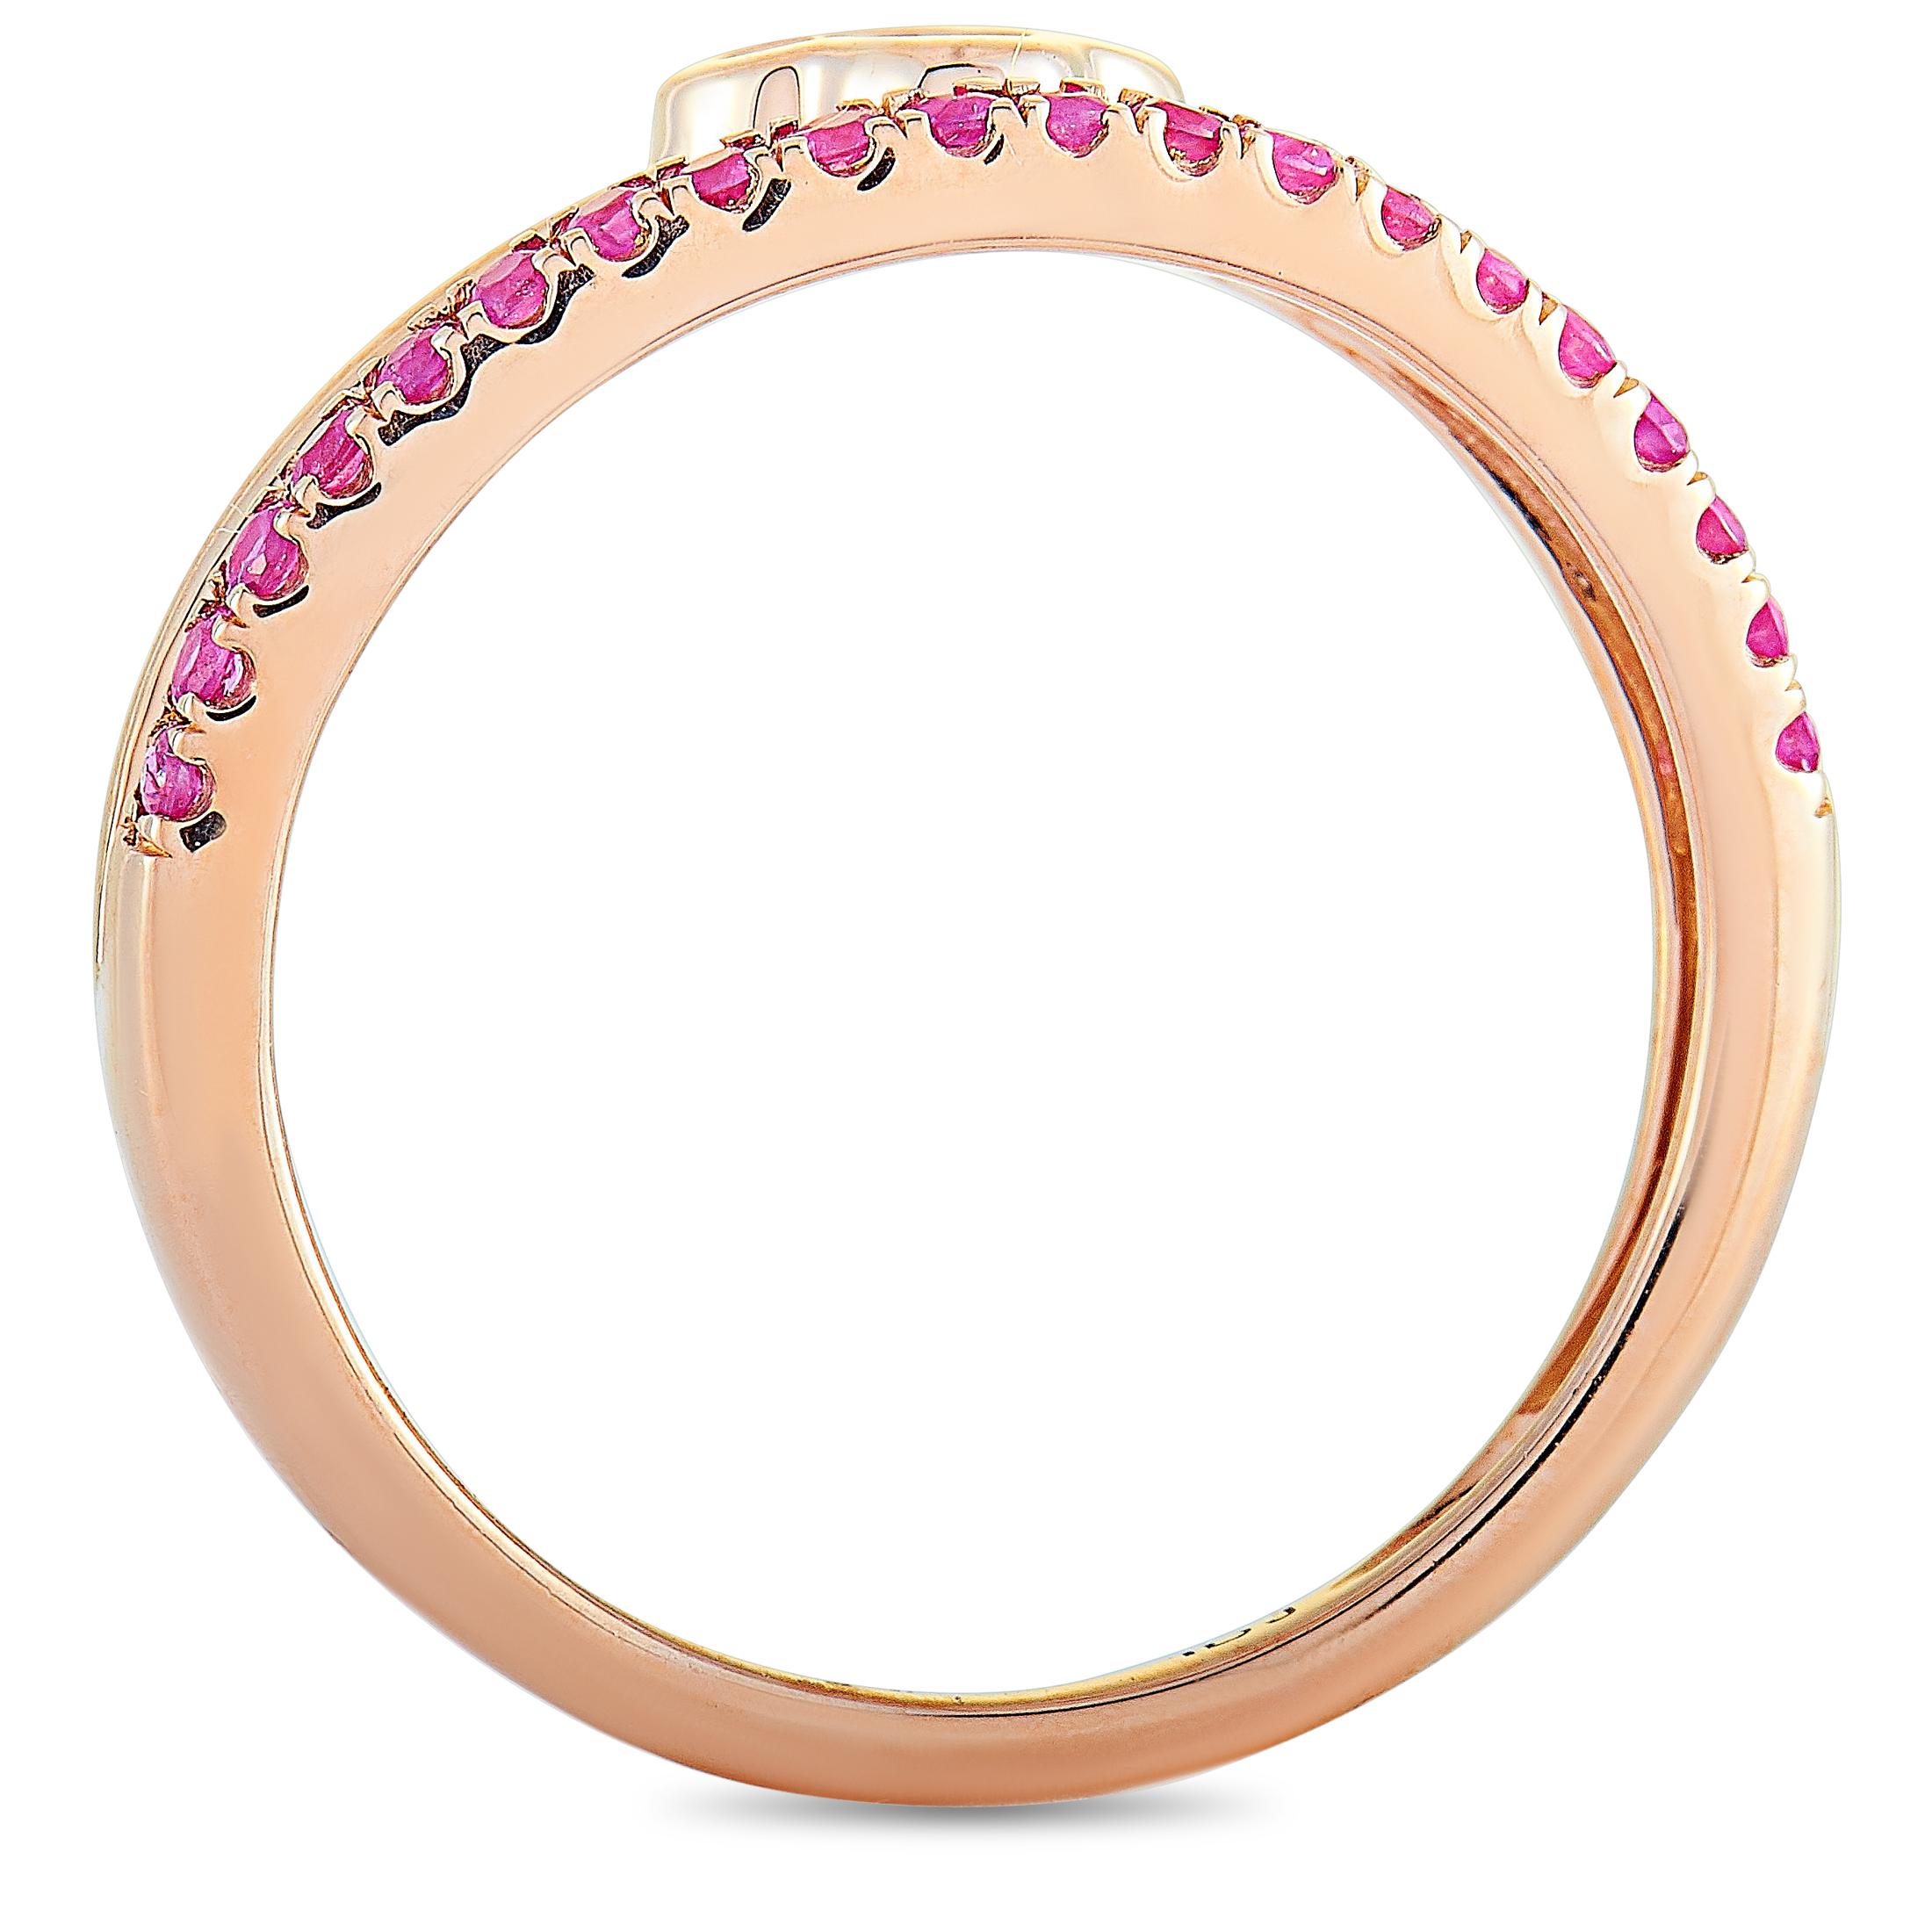 This LB Exclusive ring is crafted from 14K rose gold and weighs 2.7 grams, boasting band thickness of 1 mm and top height of 2 mm, while top dimensions measure 20 by 9 mm. The ring is set with rubies that amount to 0.25 carats. Ring Size: